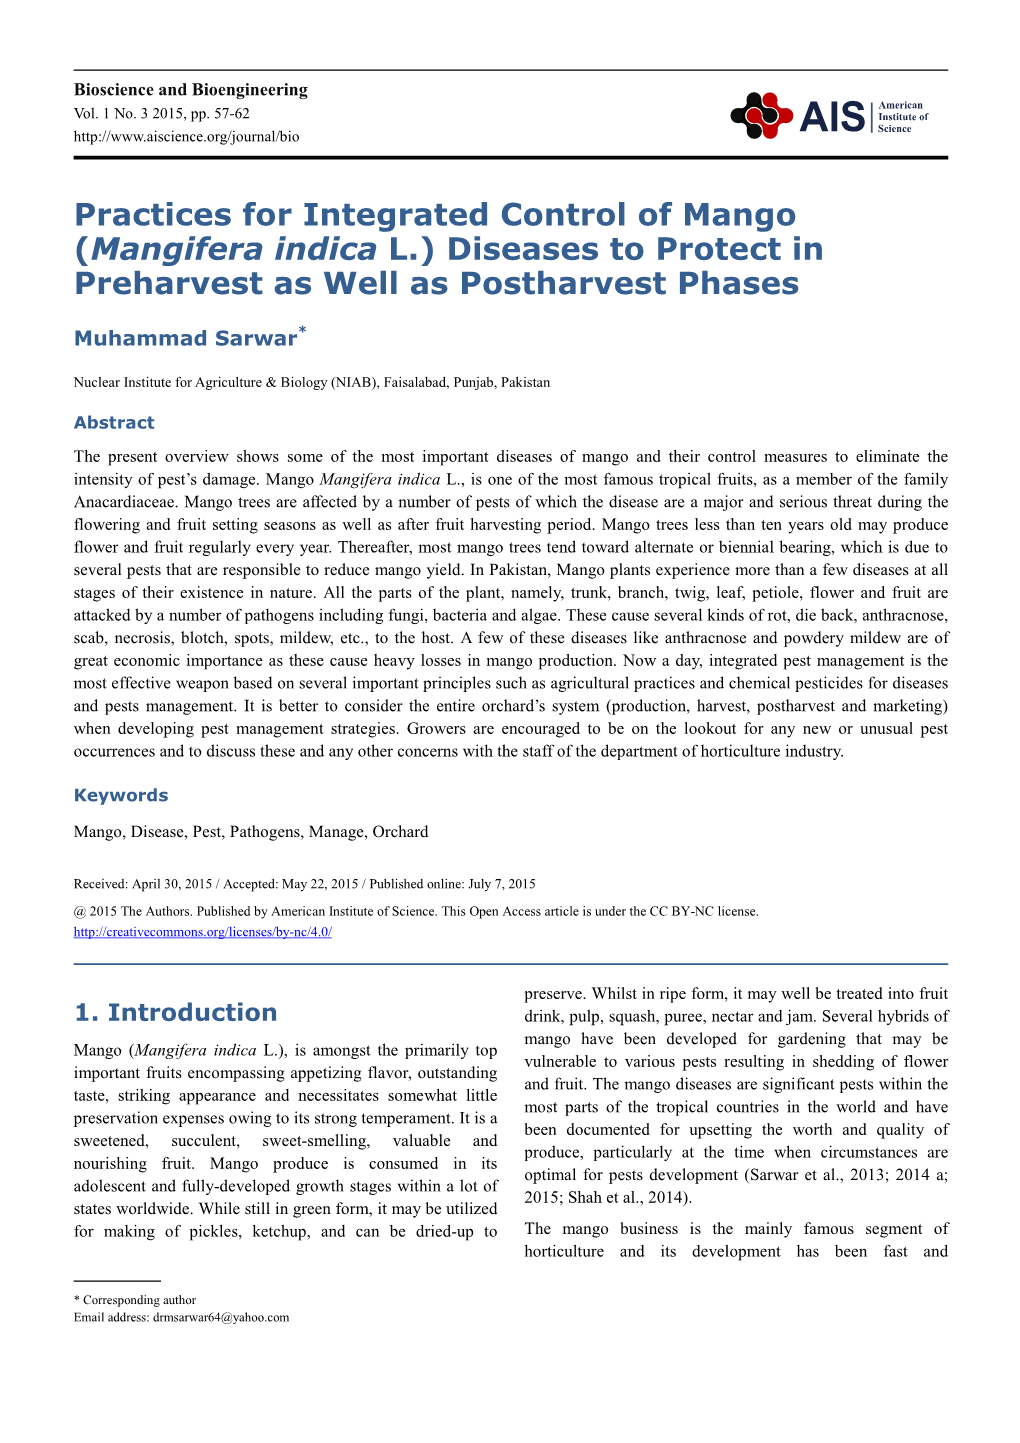 Practices for Integrated Control of Mango (Mangifera Indica L.) Diseases to Protect in Preharvest As Well As Postharvest Phases